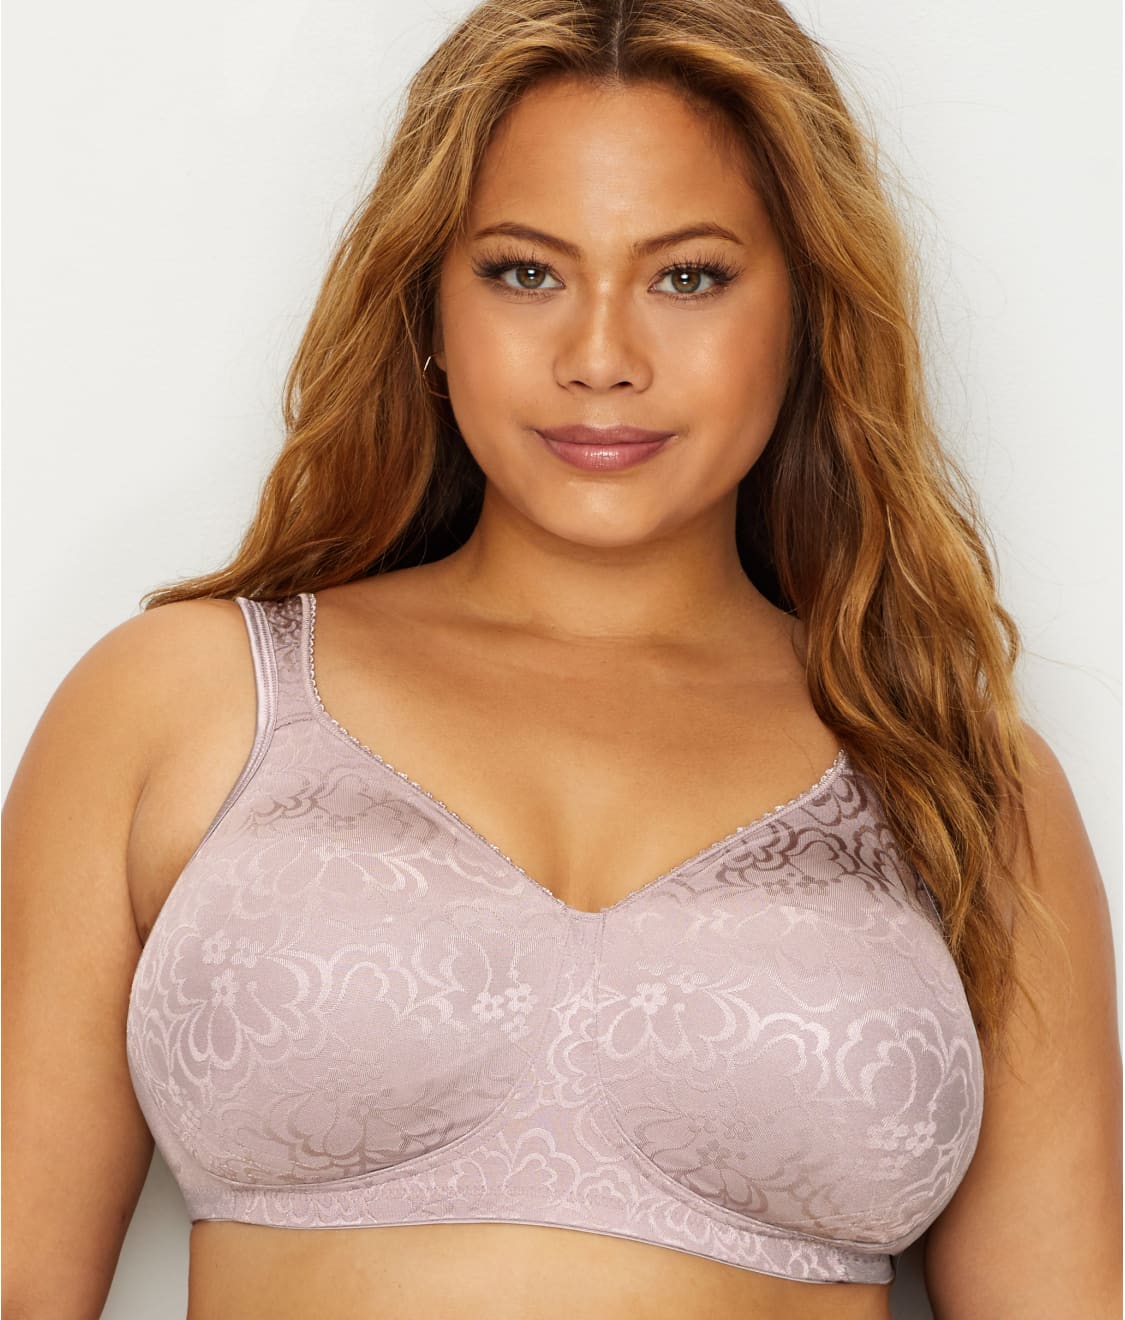 Playtex: 18 Hour Ultimate Lift and Support Wire-Free Bra 4745